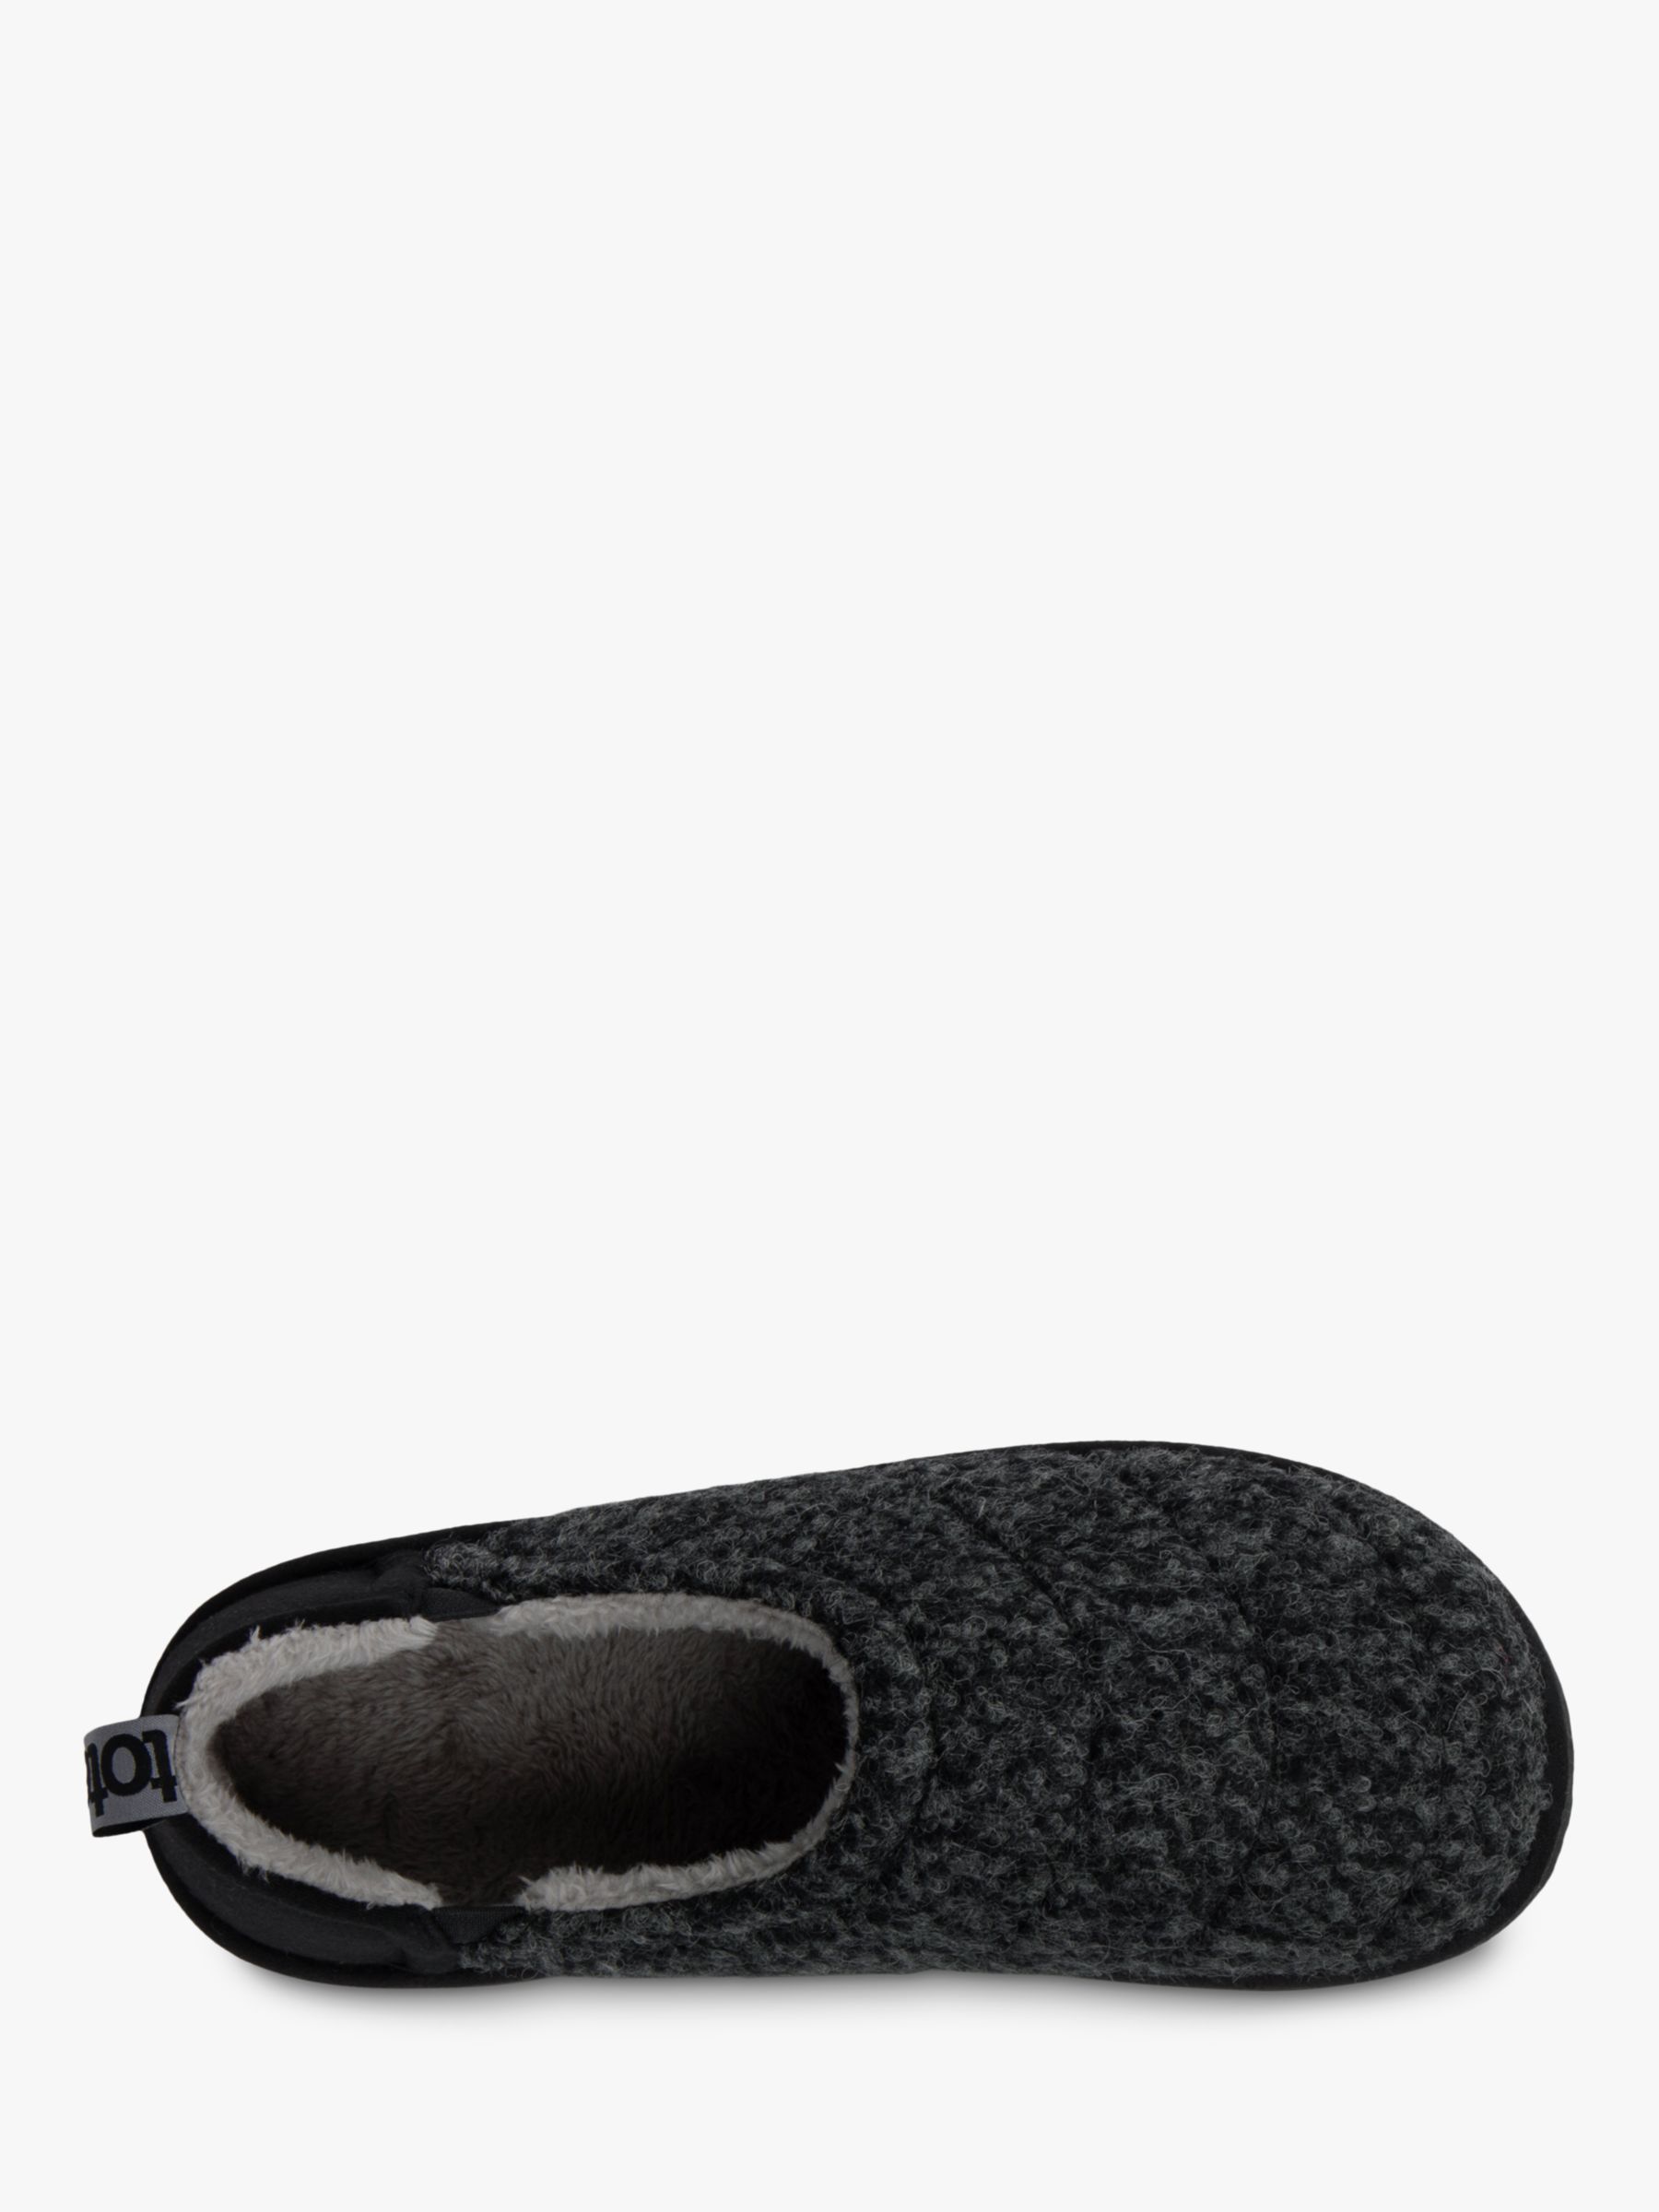 totes Quilted Full Back Slippers, Black, 8